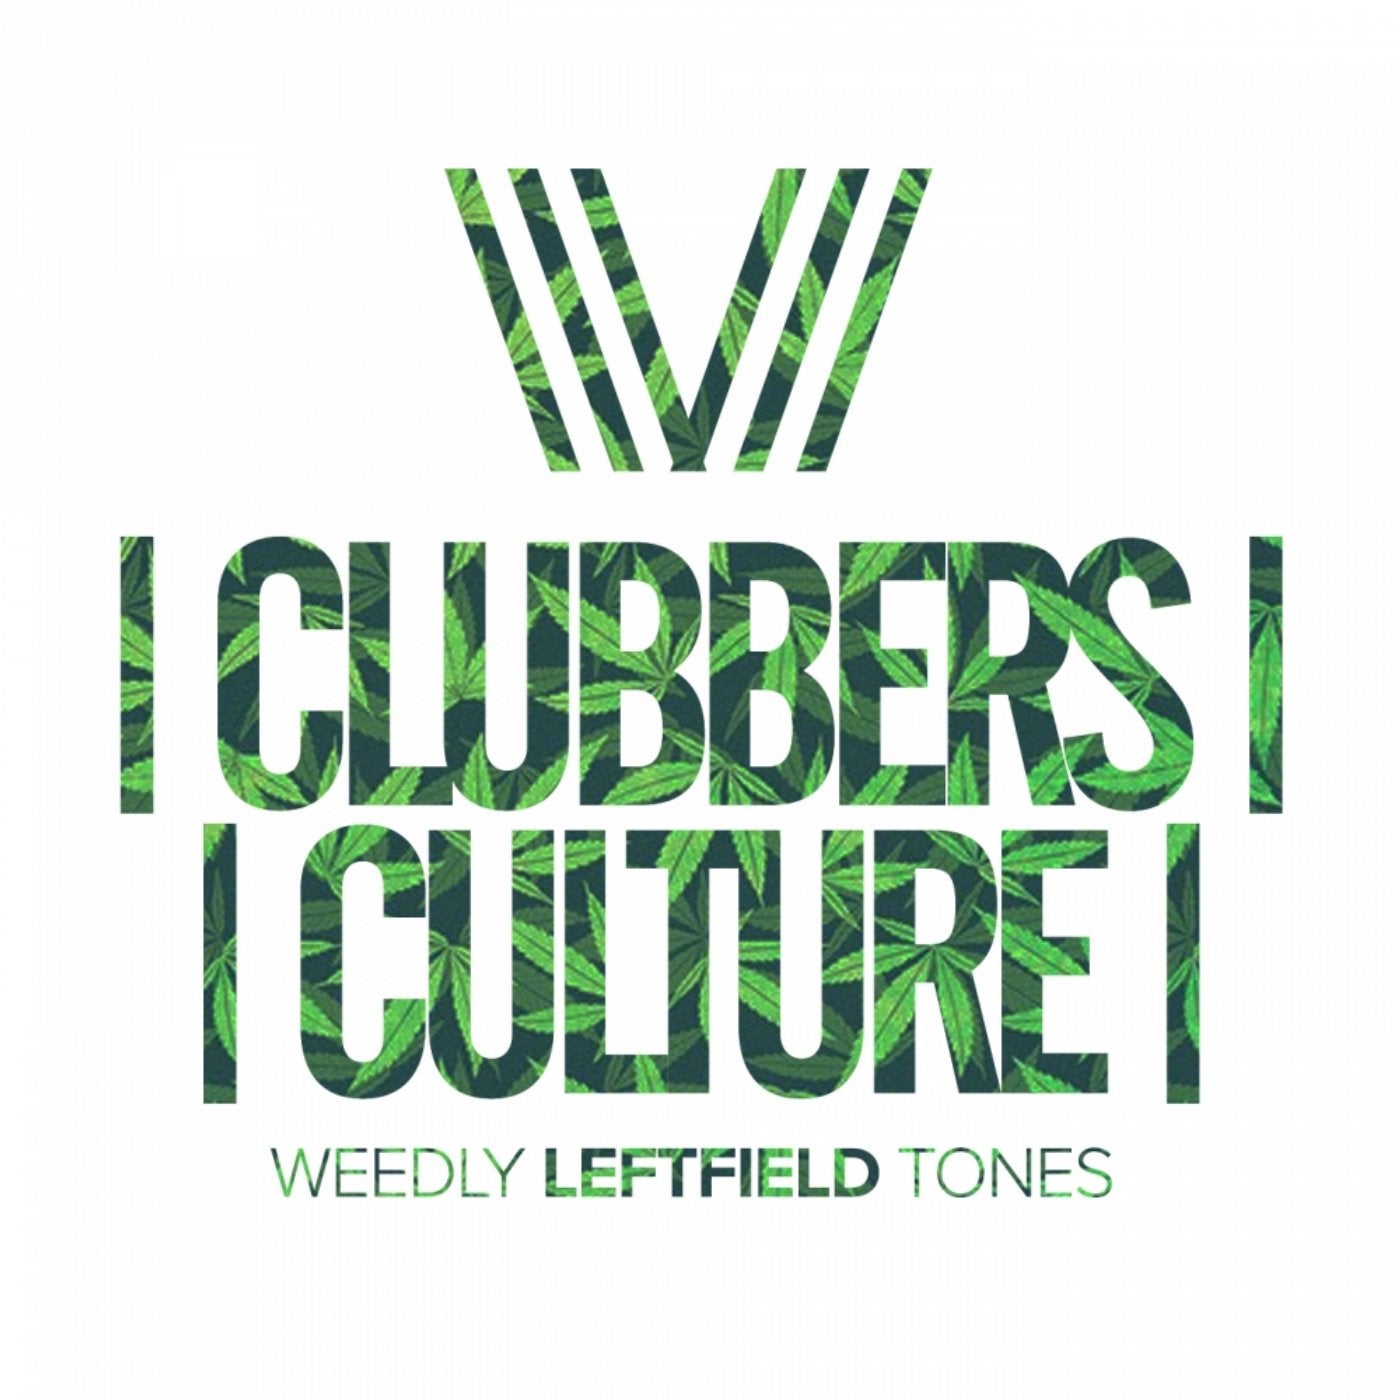 Clubbers Culture: Weedly Leftfield Tones